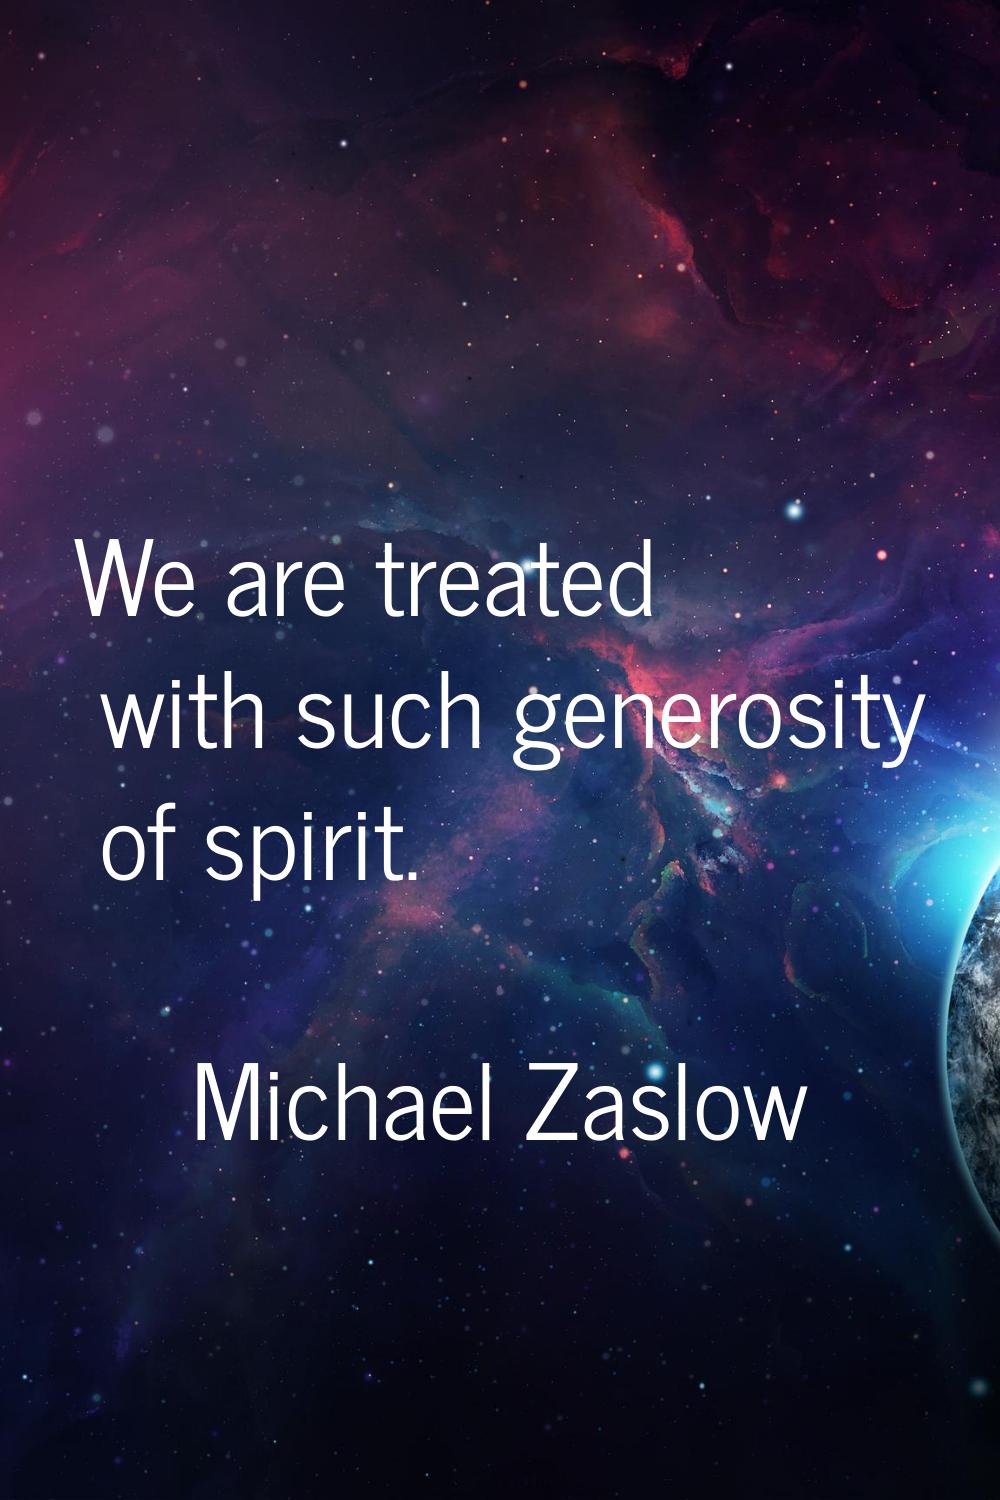 We are treated with such generosity of spirit.